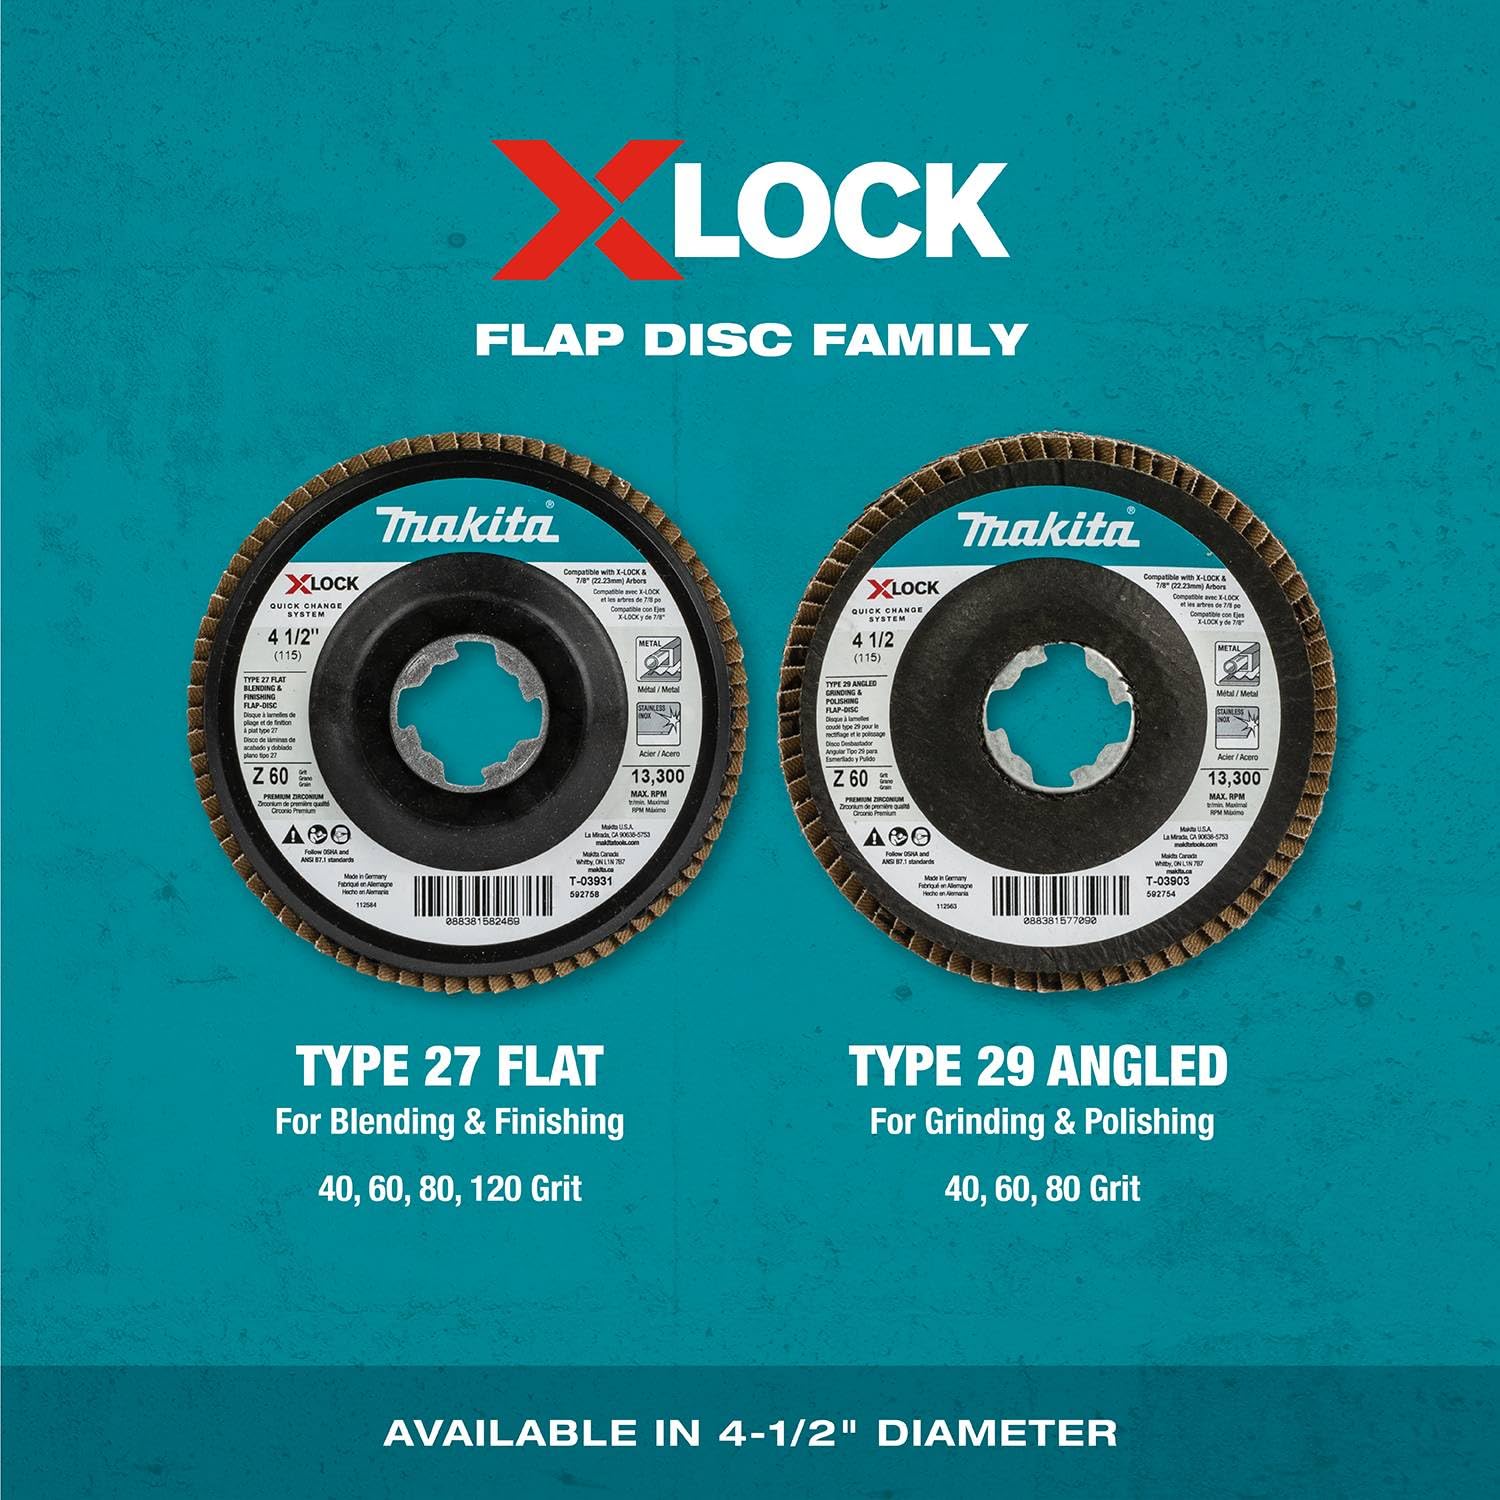 Makita T-03894 X-LOCK 4‑1/2" 40 Grit Type 29 Angled Grinding and Polishing Flap Disc for X-LOCK and All 7/8" Arbor Grinders